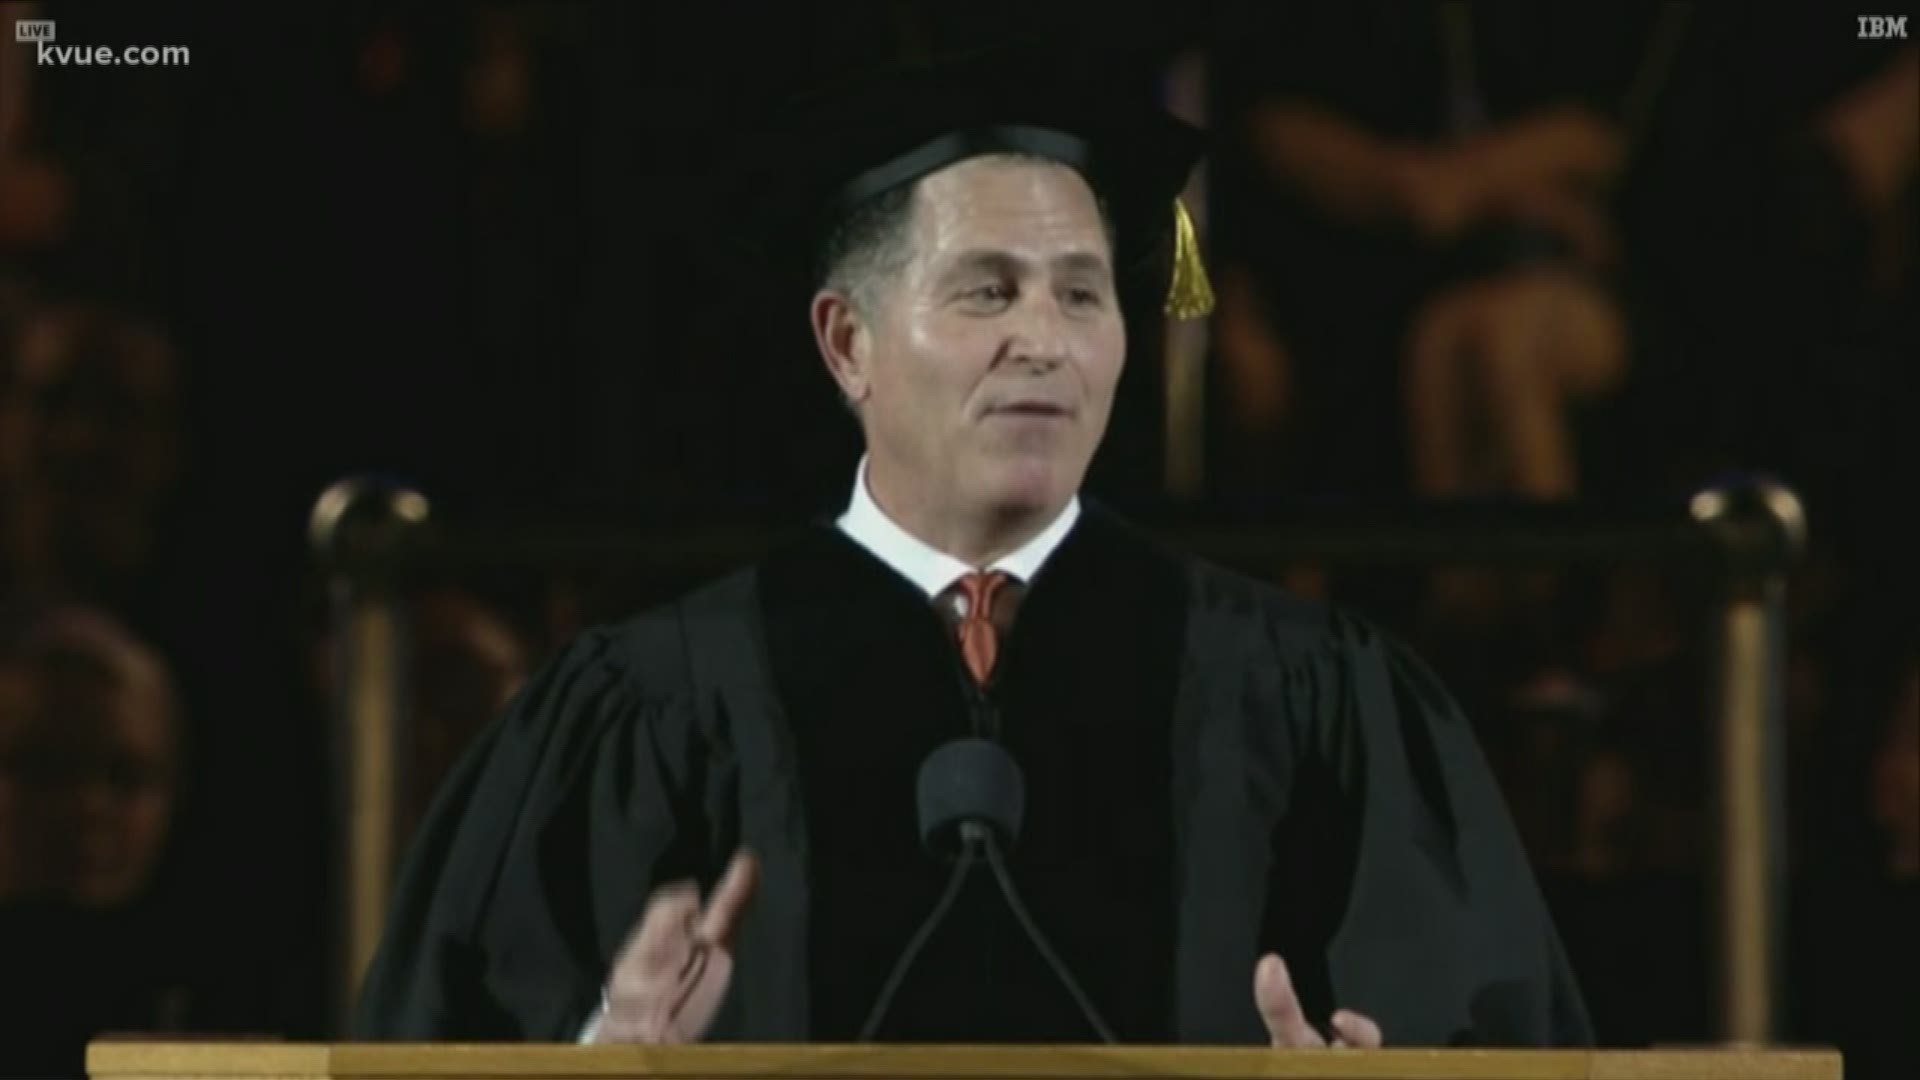 The 136th spring commencement was held Saturday in front of the UT Tower. Dell CEO Michael Dell gave the keynote address.